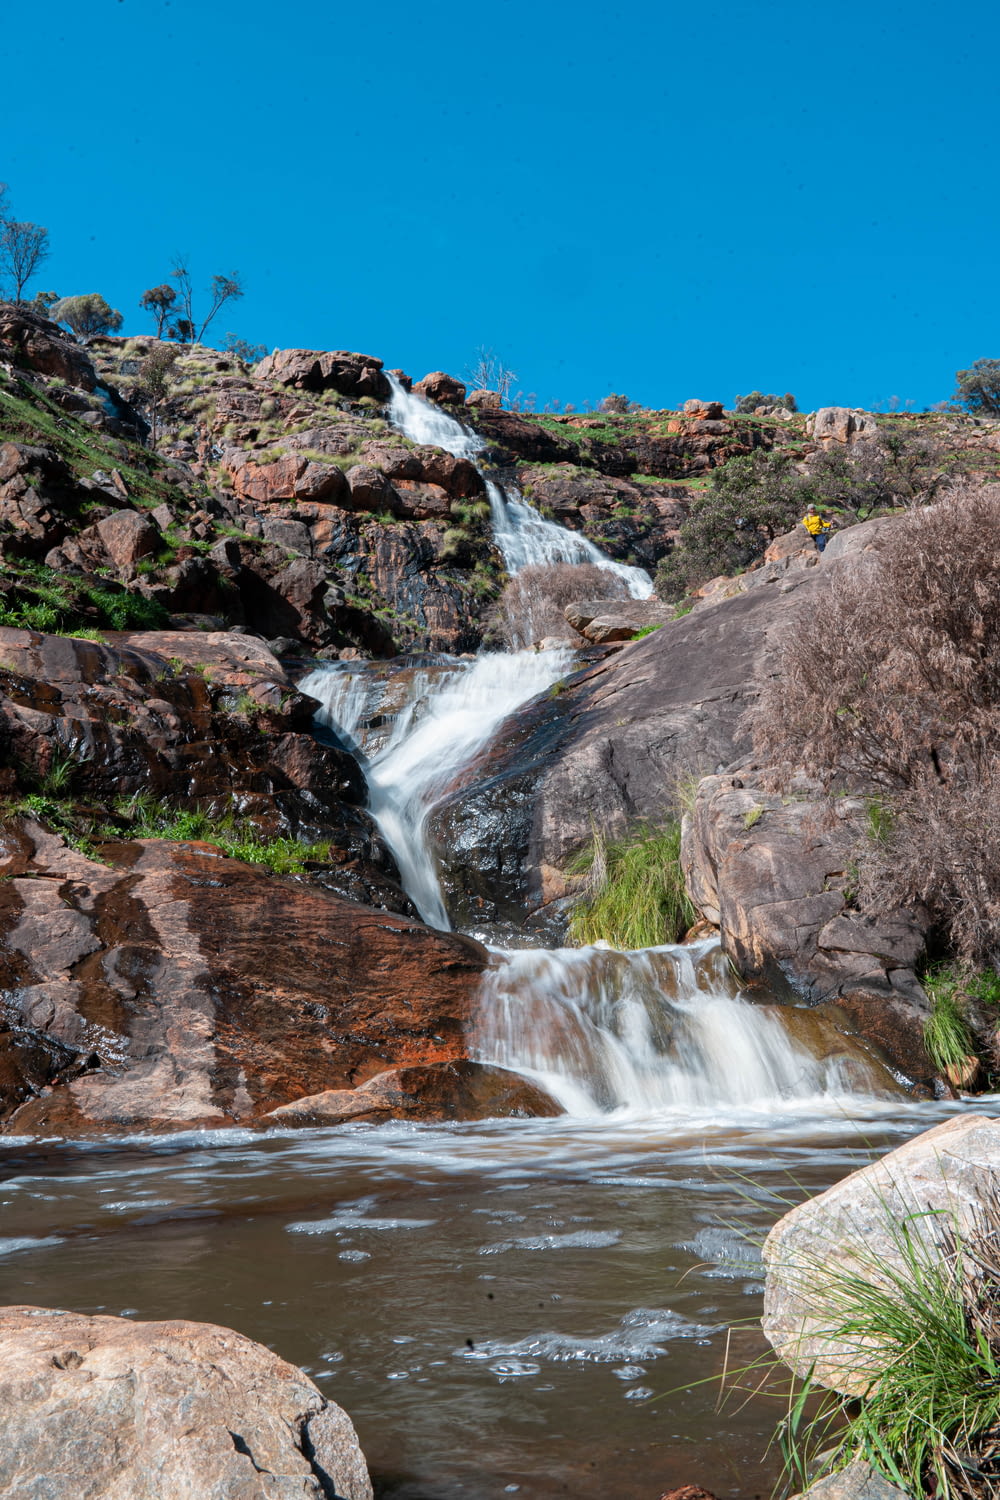 water falls on brown rocky mountain under blue sky during daytime